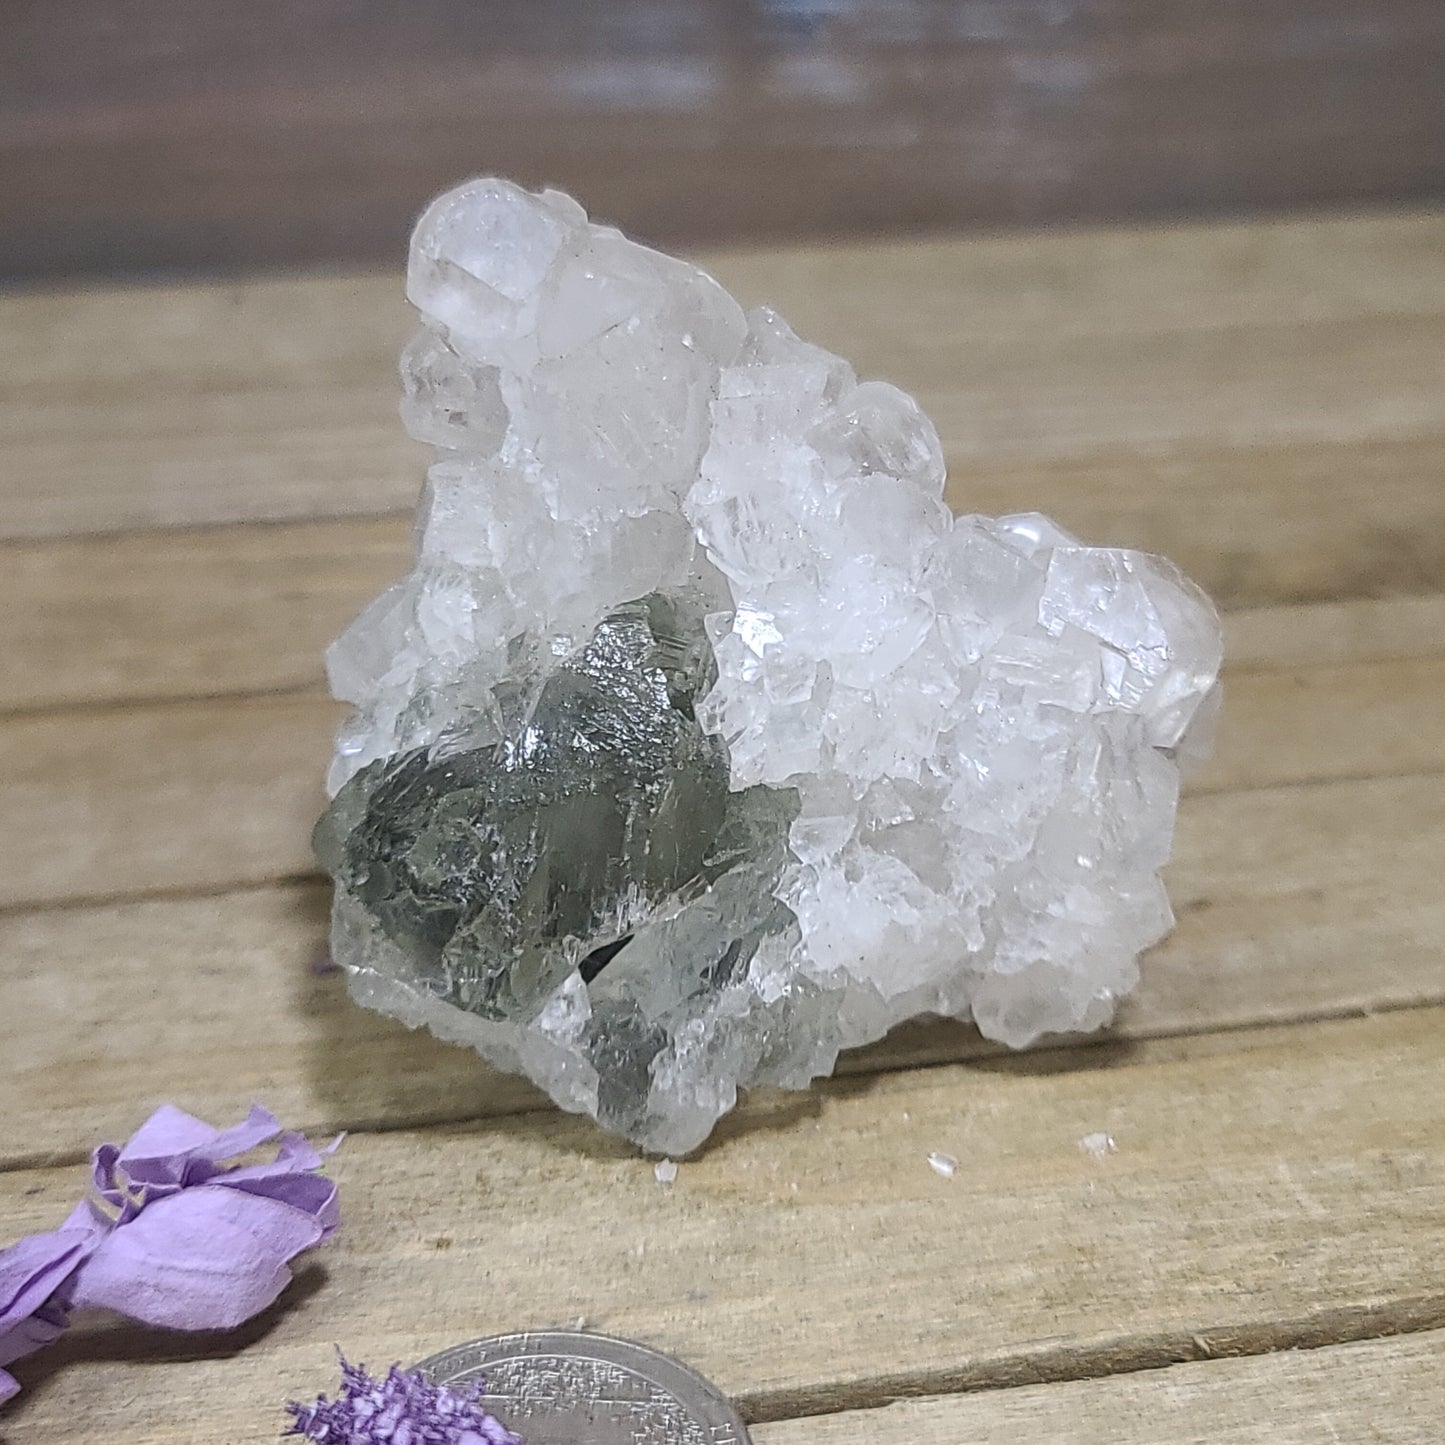 Diamond Calcite Natural Clusters on Green Apophyllite